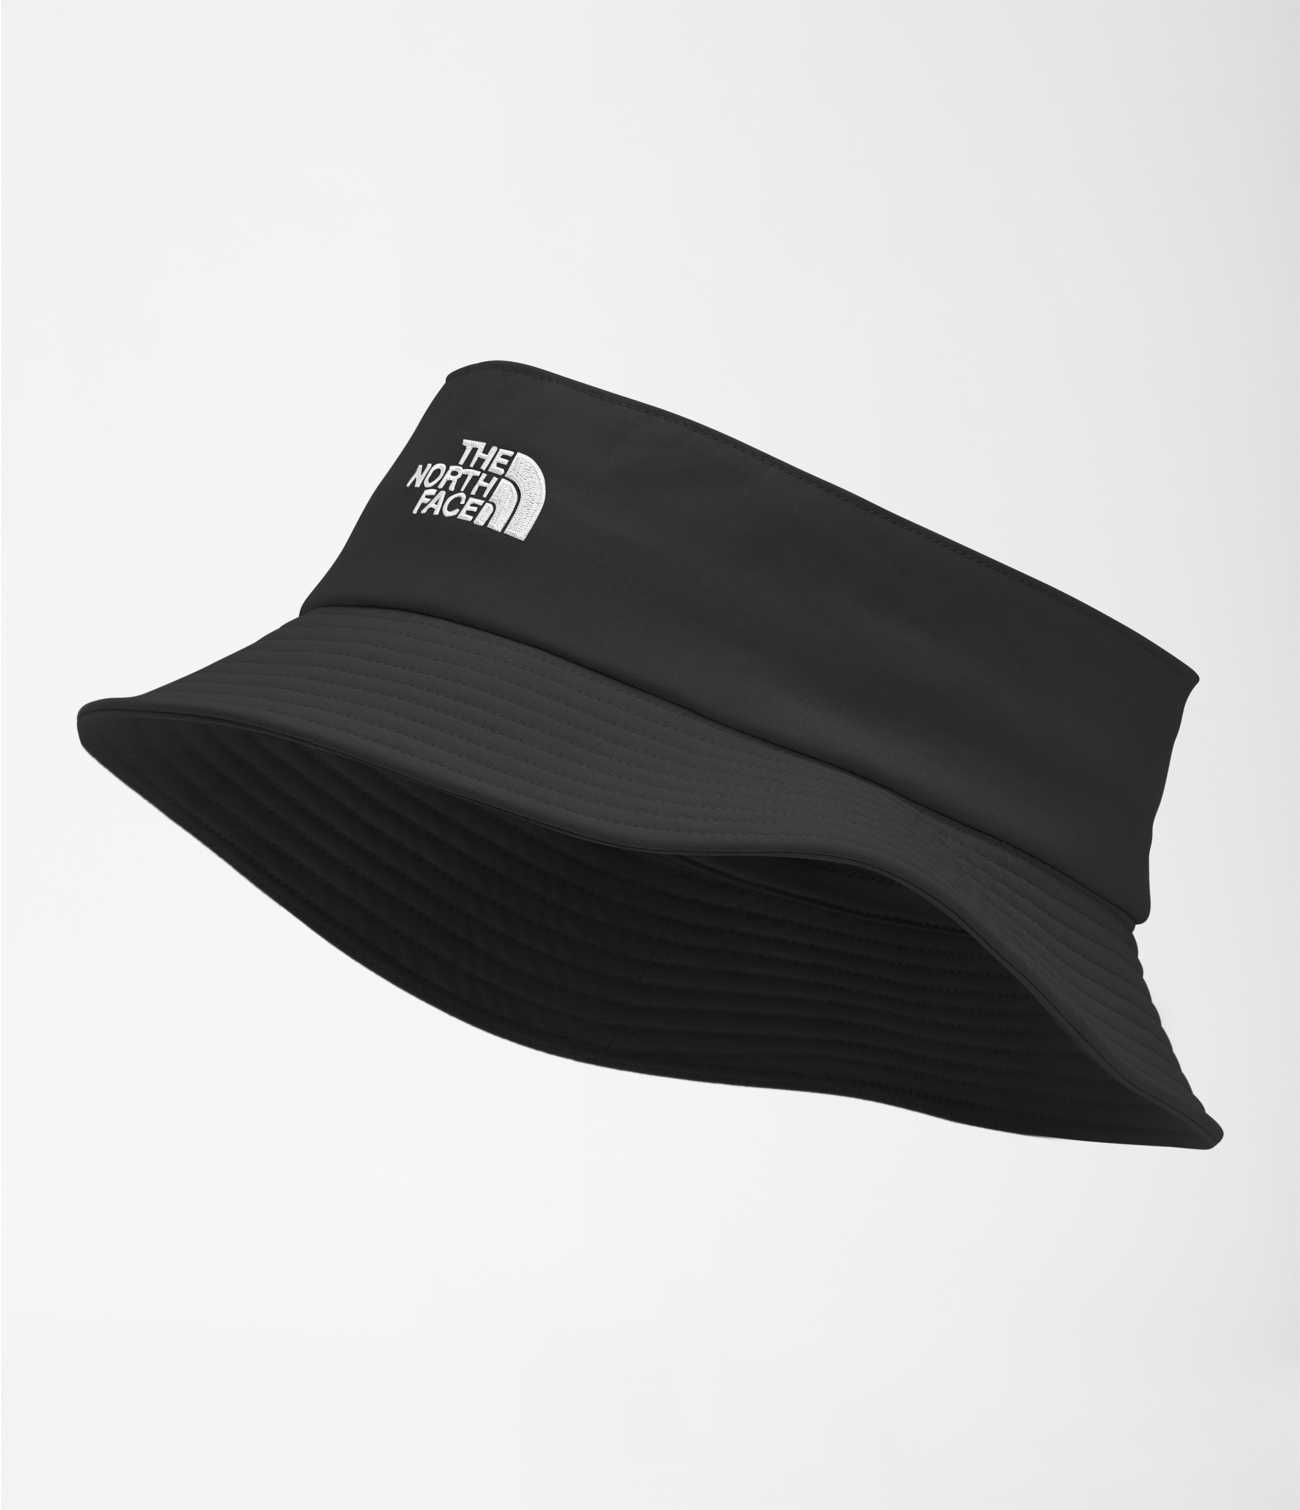 The North Face Renewed - CLASS V TOP KNOT BUCKET